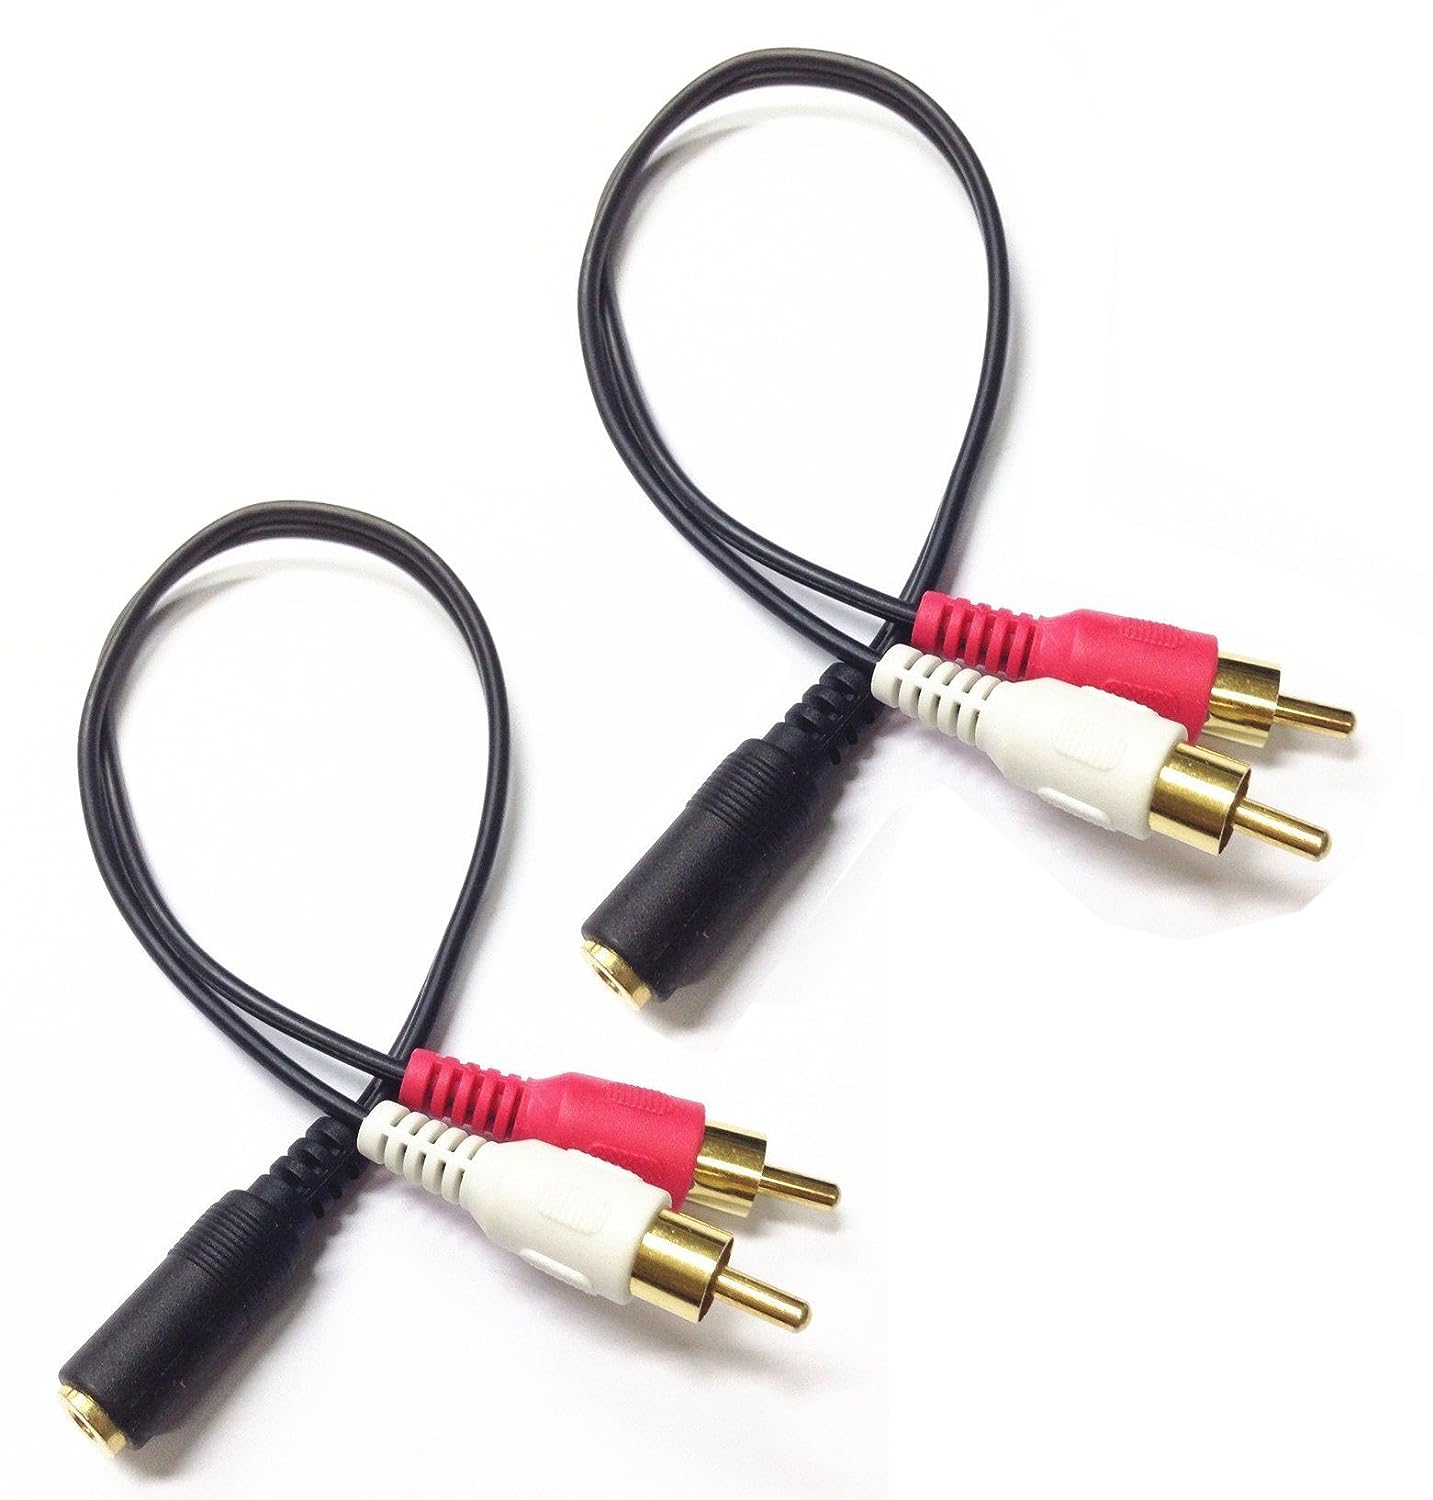 CERRXIAN 0.2m Gold 3.5mm Female Stereo Jack to 2 RCA [...]